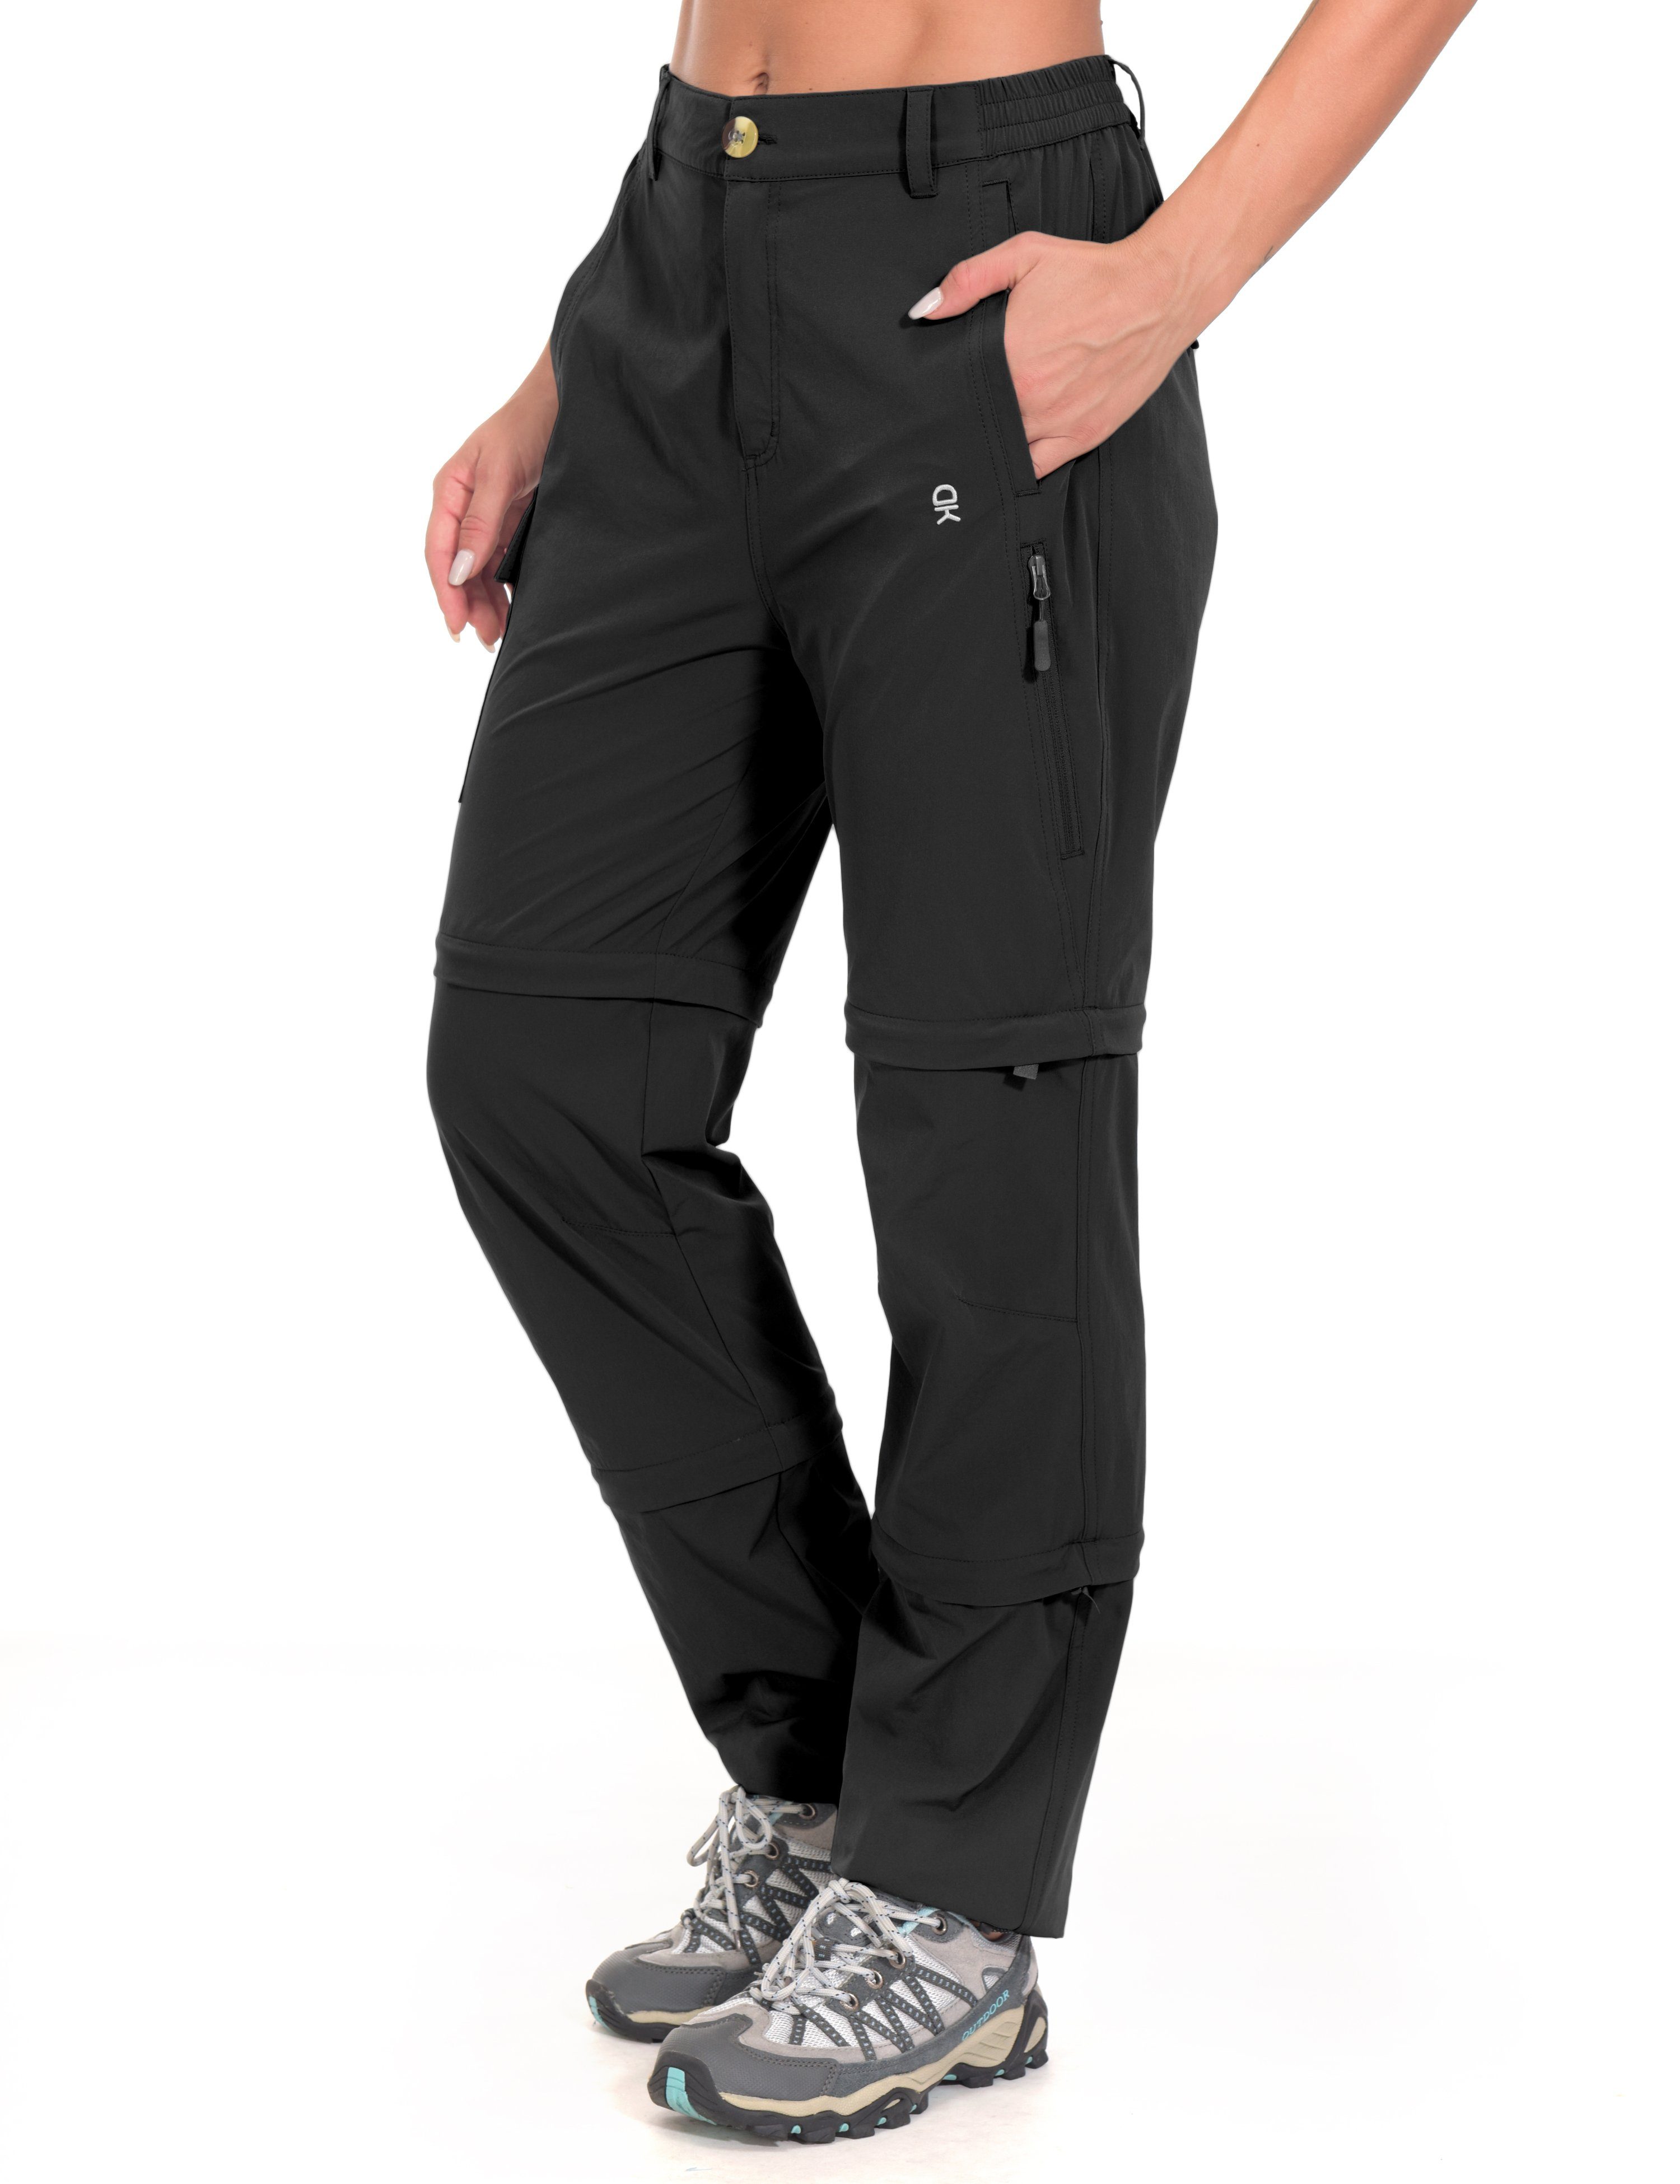 Women's Stretch Convertible Zip-Off Quick-Dry Hiking Pants 